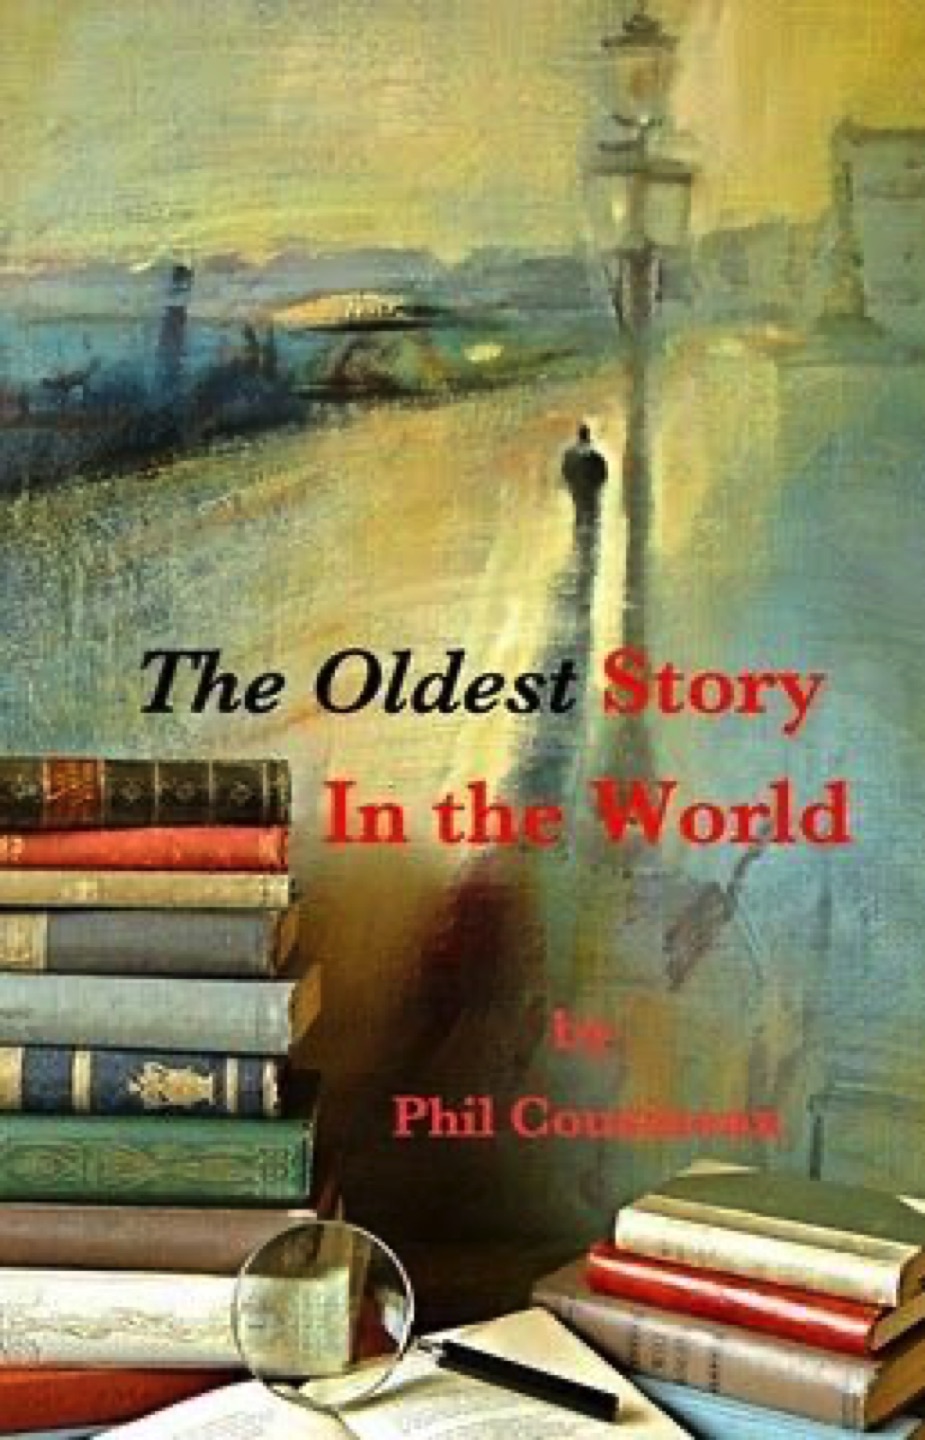 Gregg Chadwick's The Poet's Dawn on the Cover of Phil Cousineau's The Oldest Story In the World